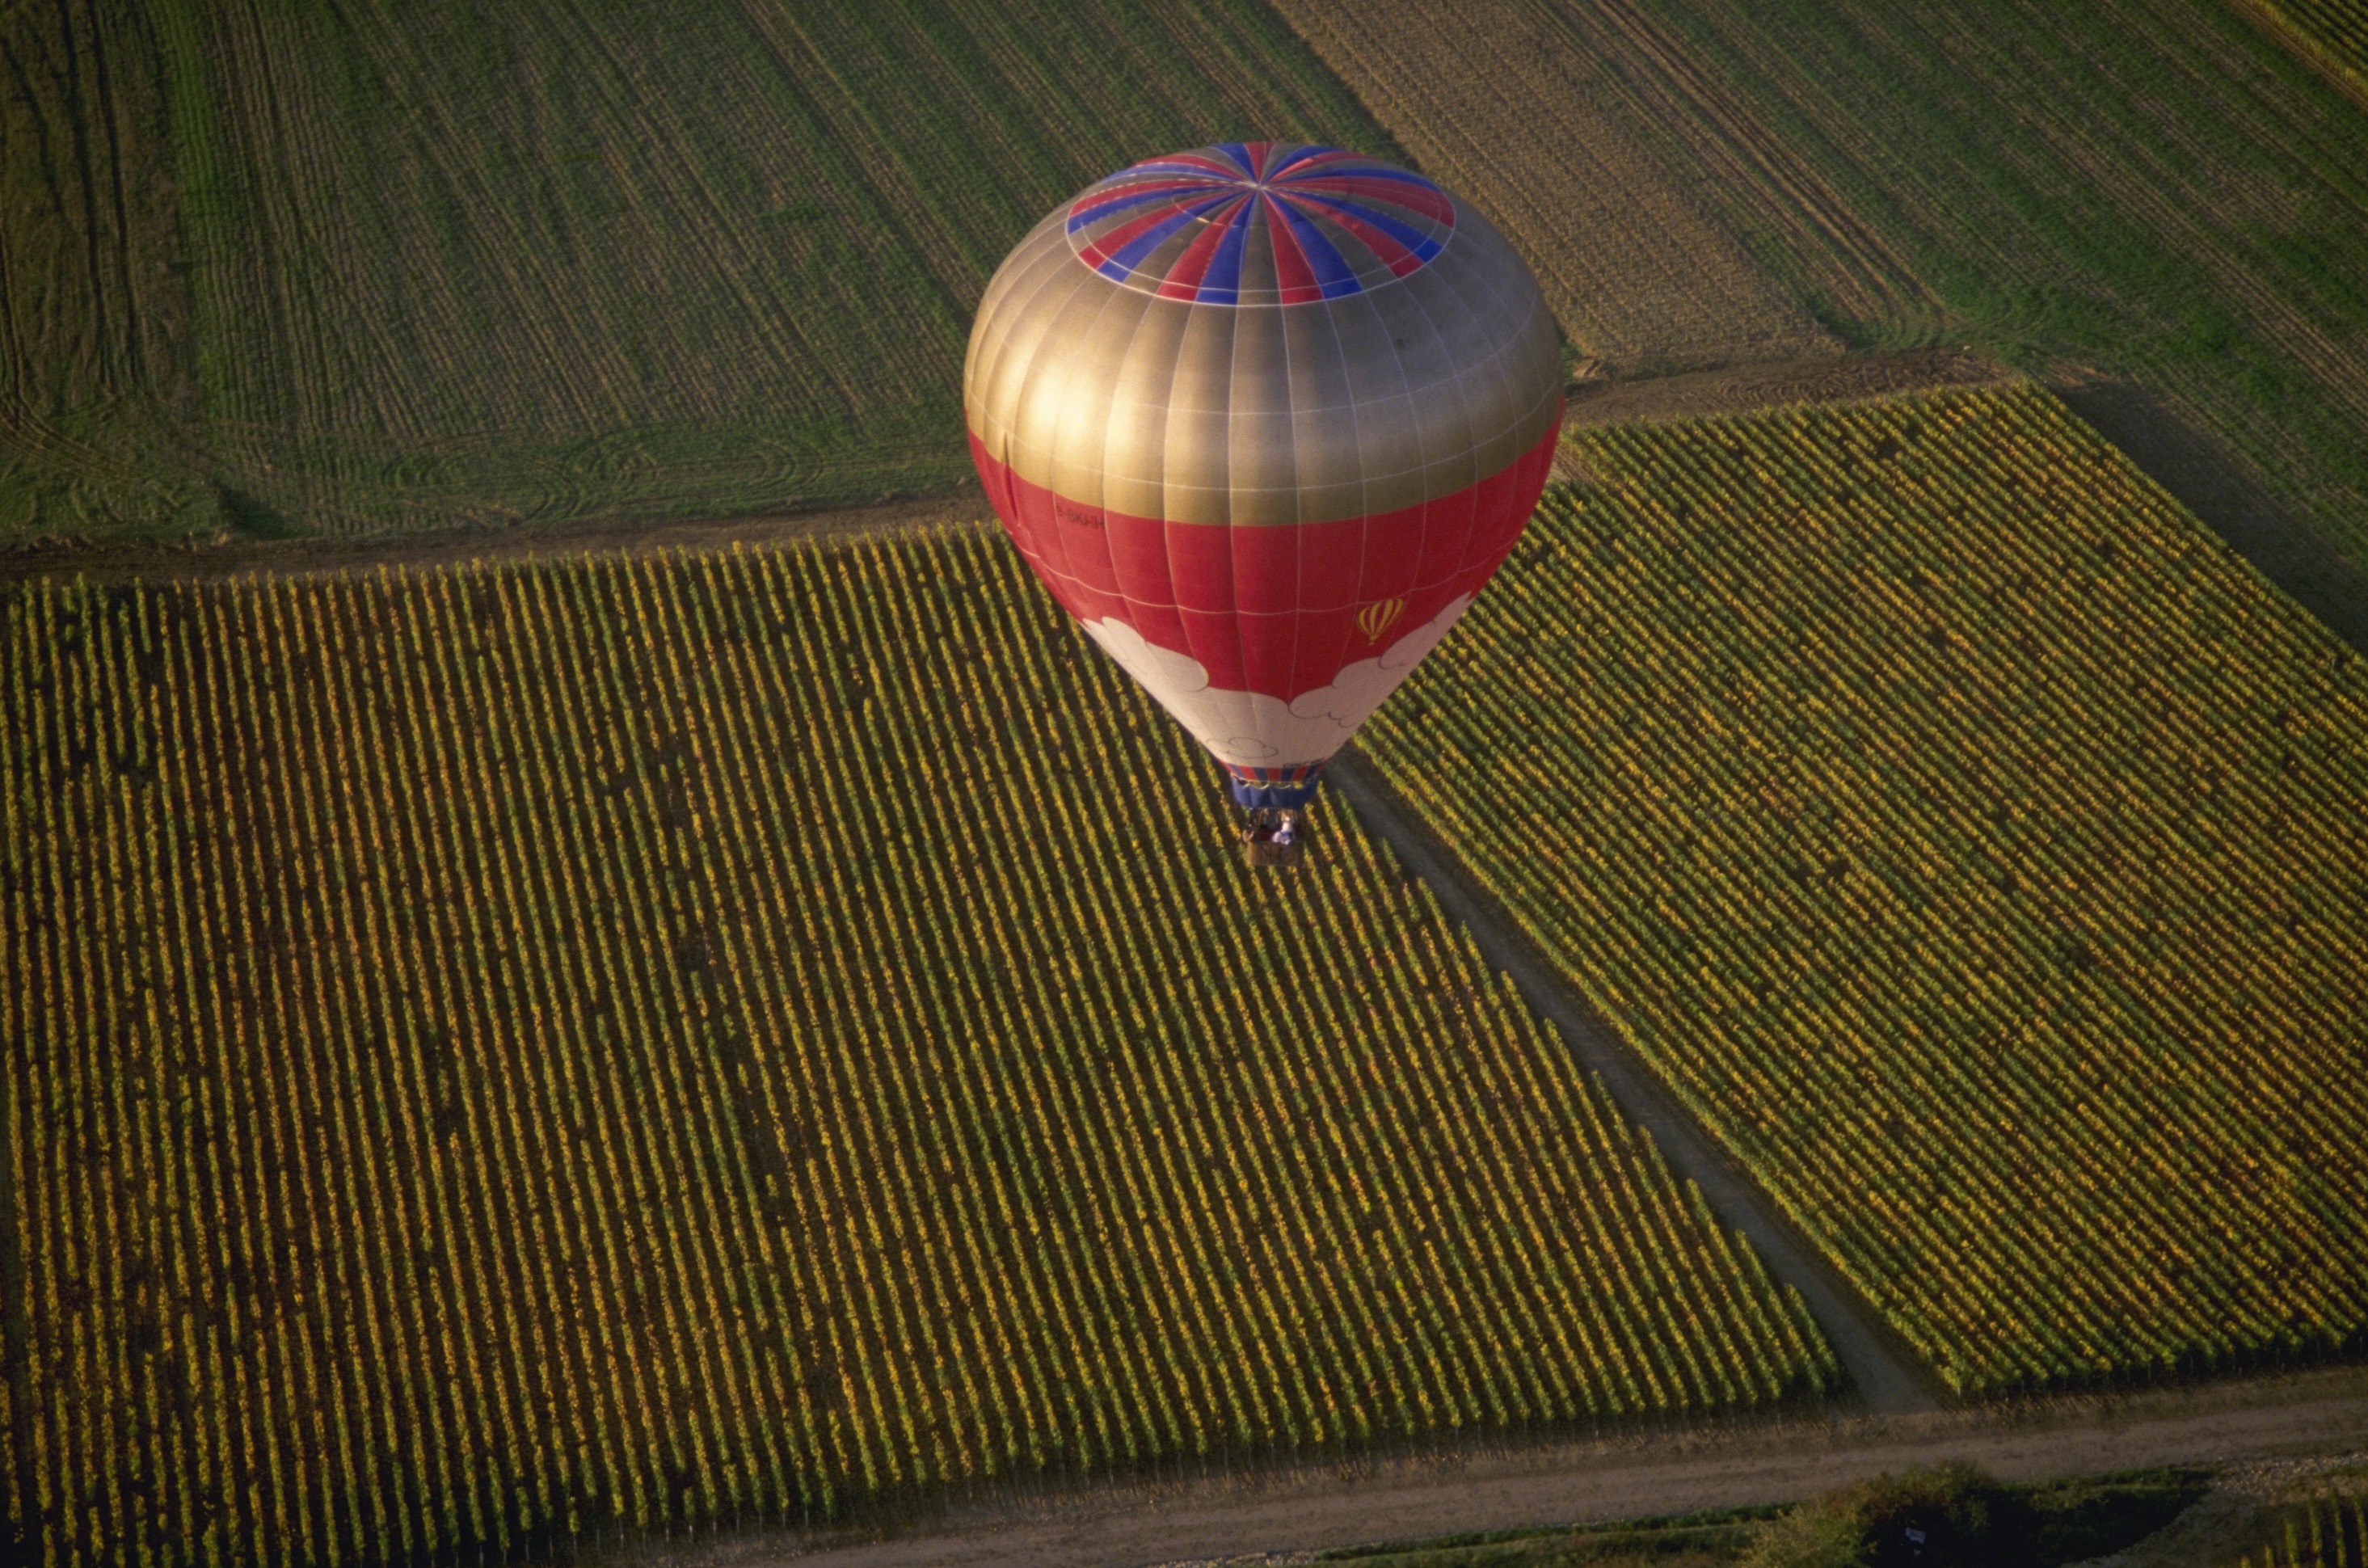  Ballooning over Italy or France 